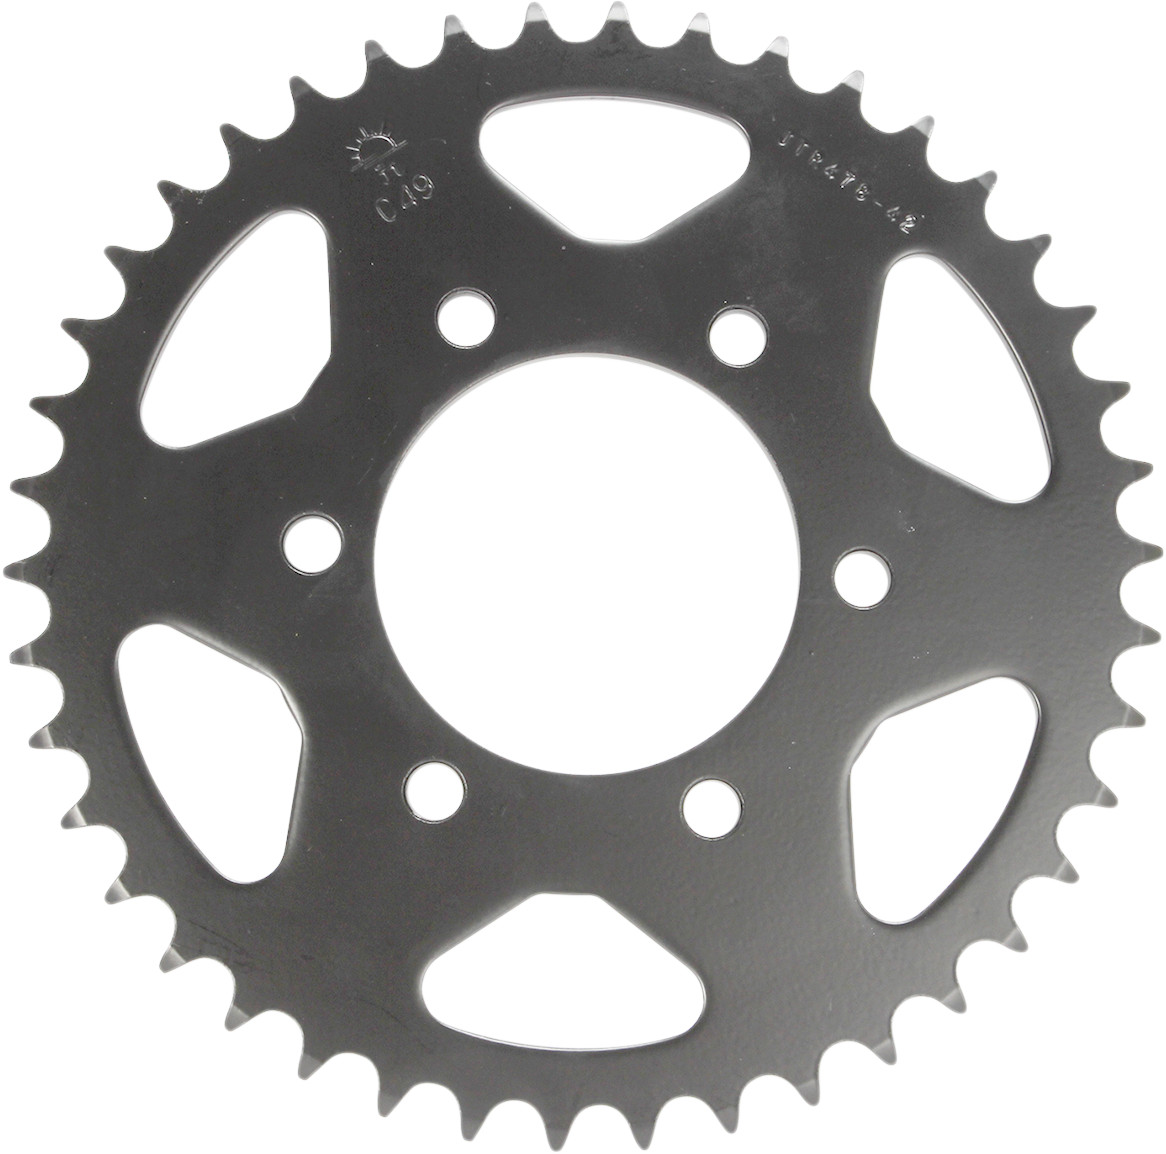 Steel Rear Sprocket - 42 Tooth 520 - For Vulcan Versys Ninja 400-800 - Click Image to Close